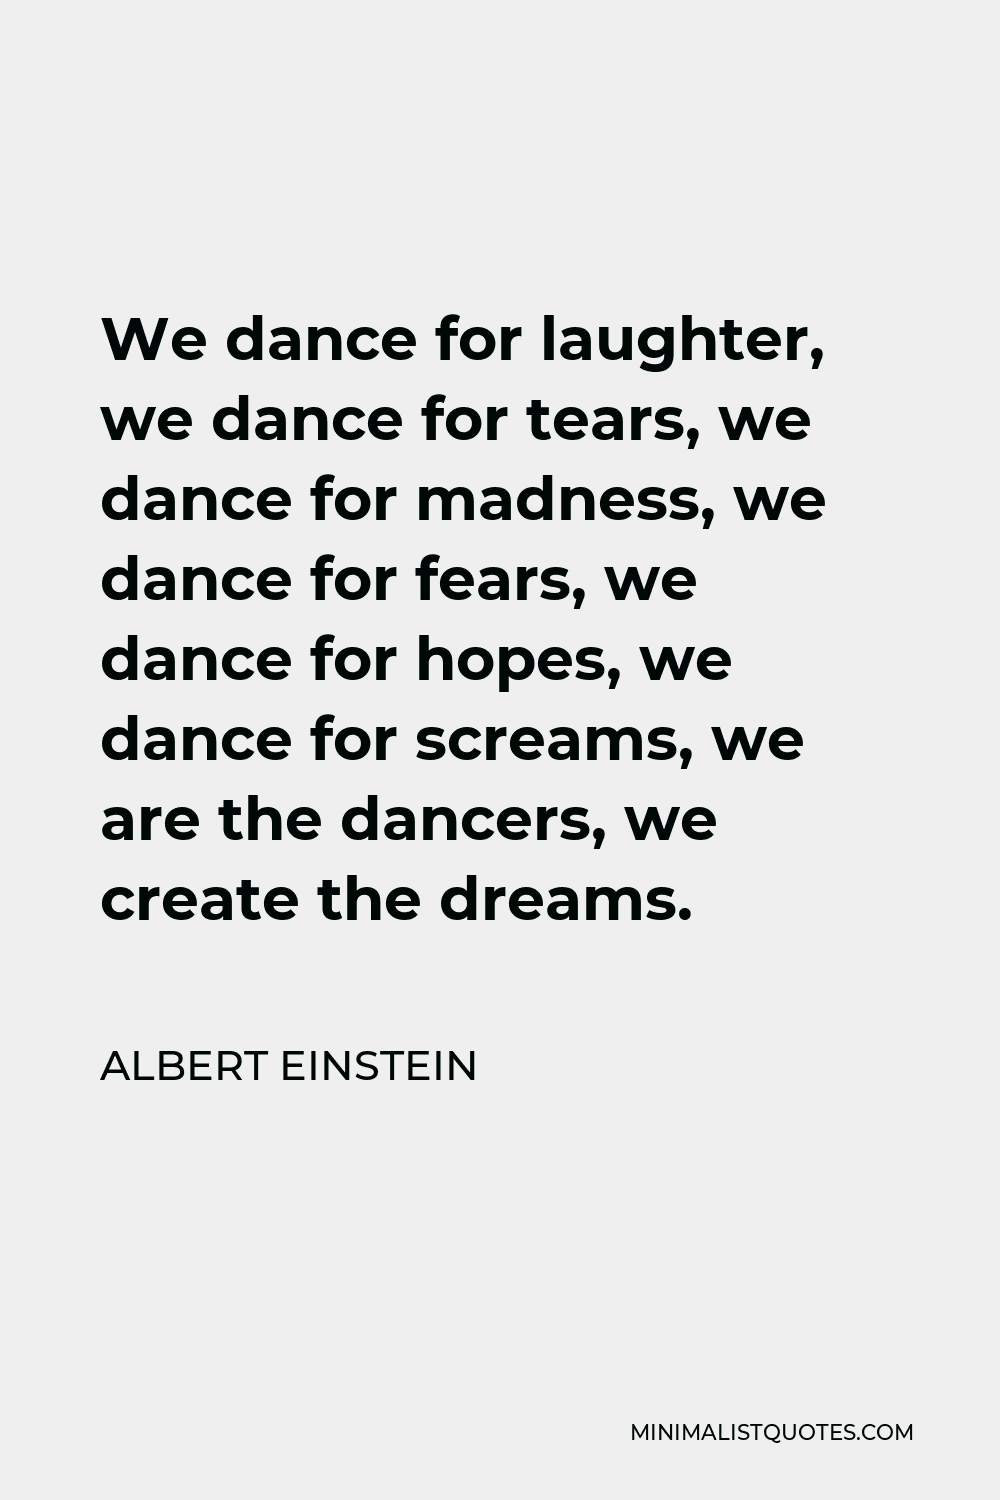 Albert Einstein Quote - We dance for laughter, we dance for tears, we dance for madness, we dance for fears, we dance for hopes, we dance for screams, we are the dancers, we create the dreams.